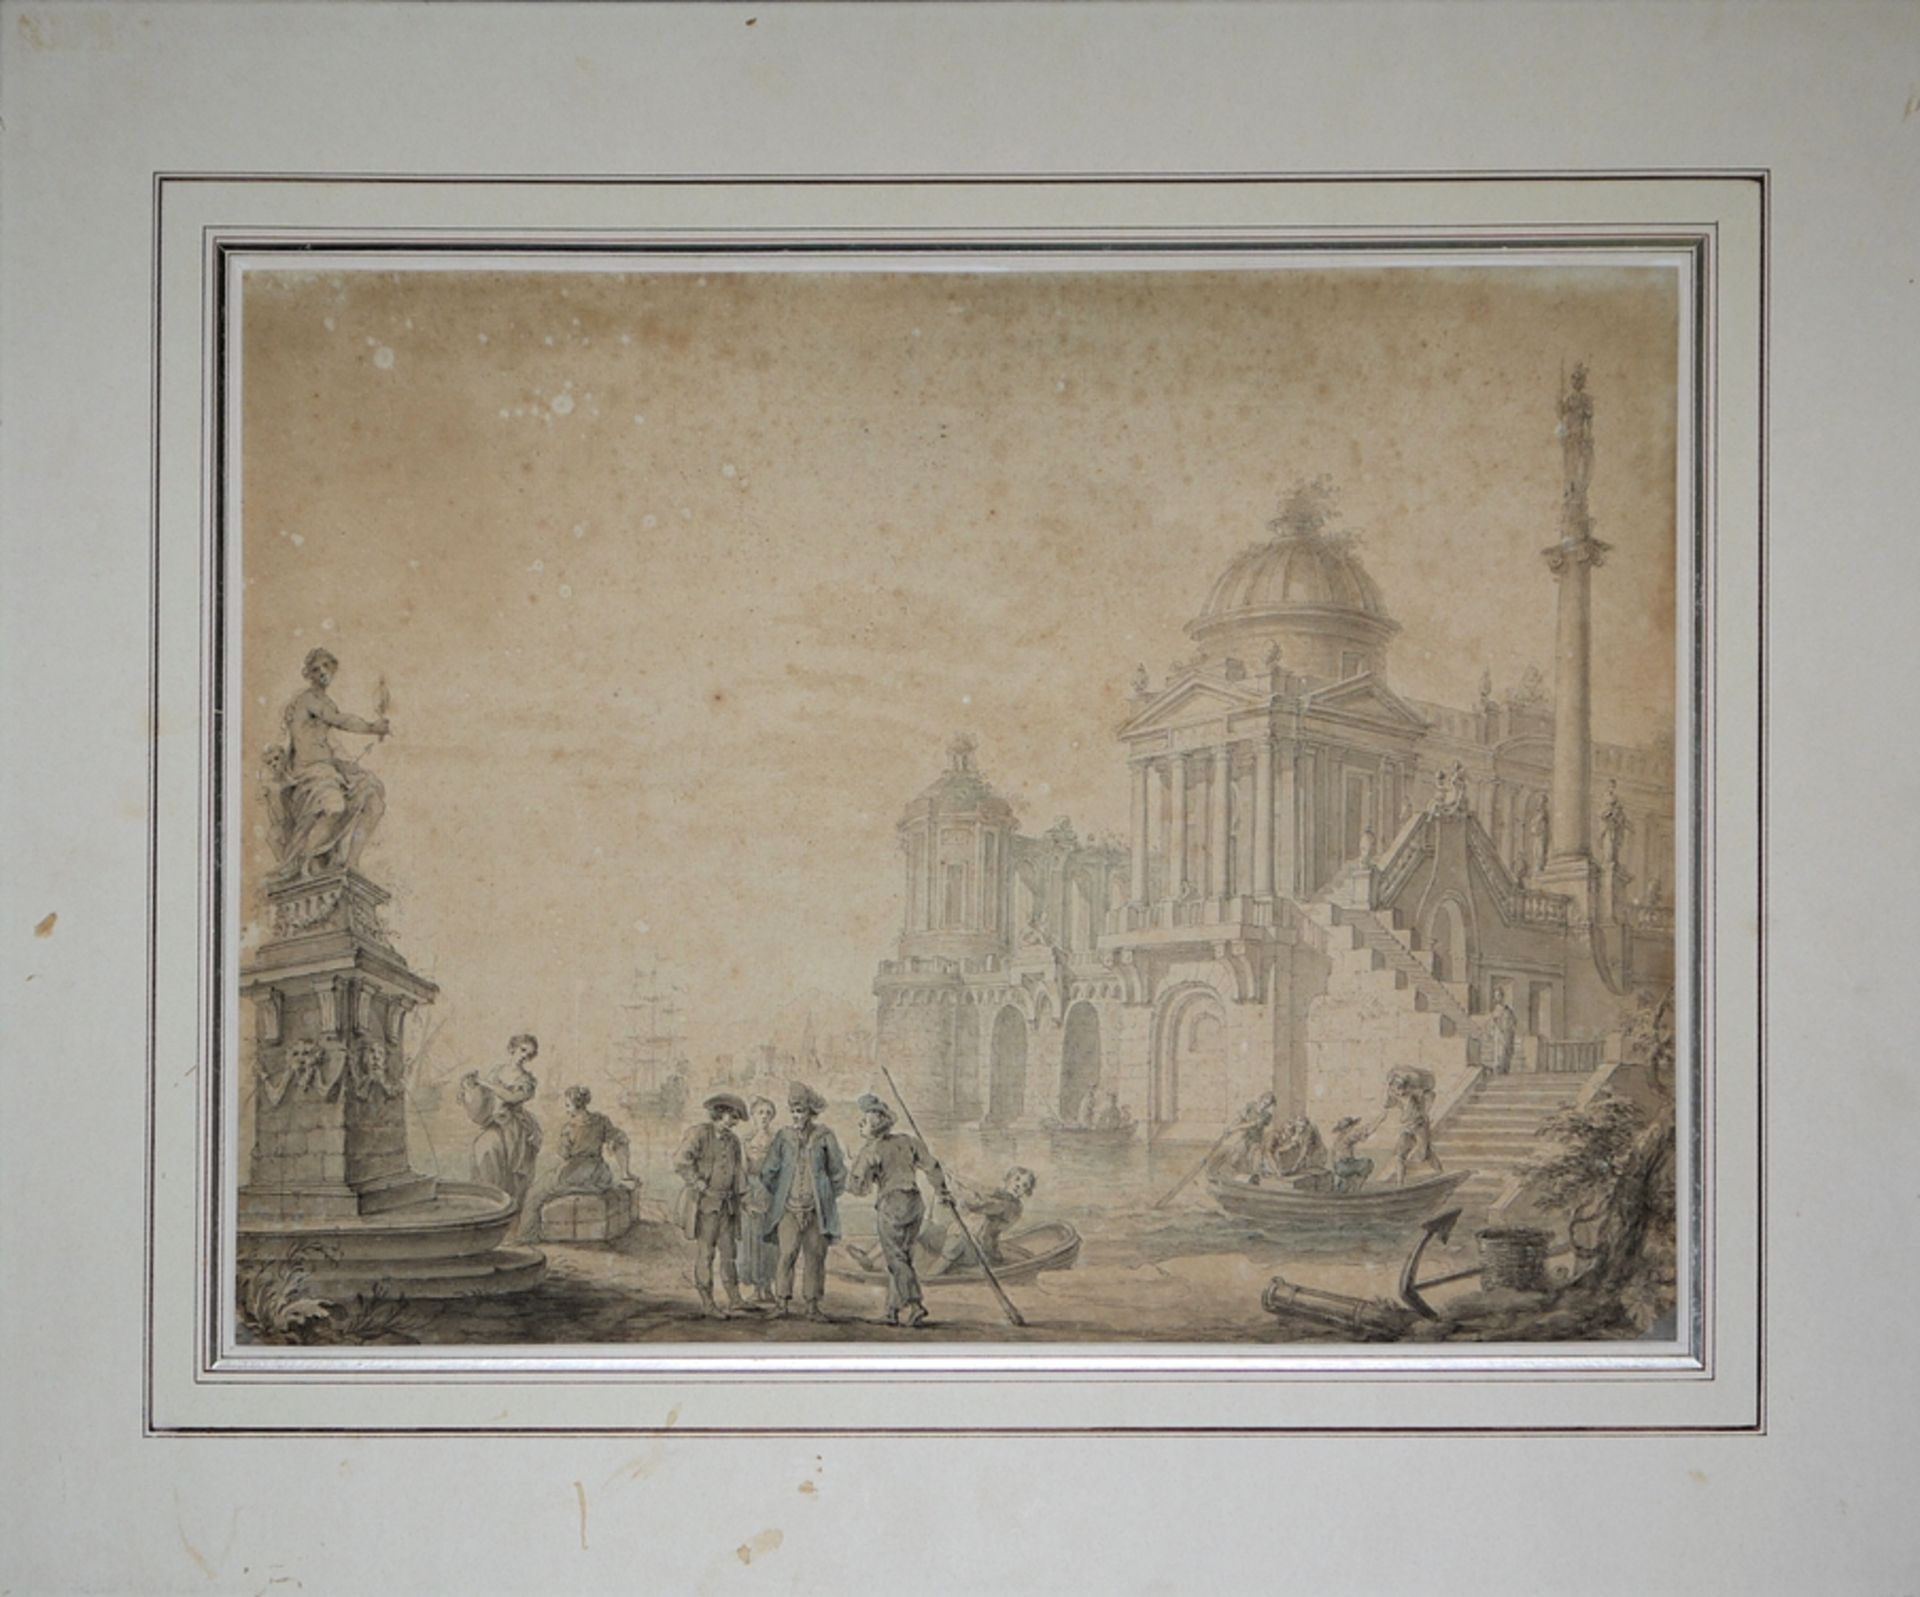 Attributed to Hubert Robert, Many-figured Roman Architectural Capriccio, probably with the Porto Ri - Image 2 of 3